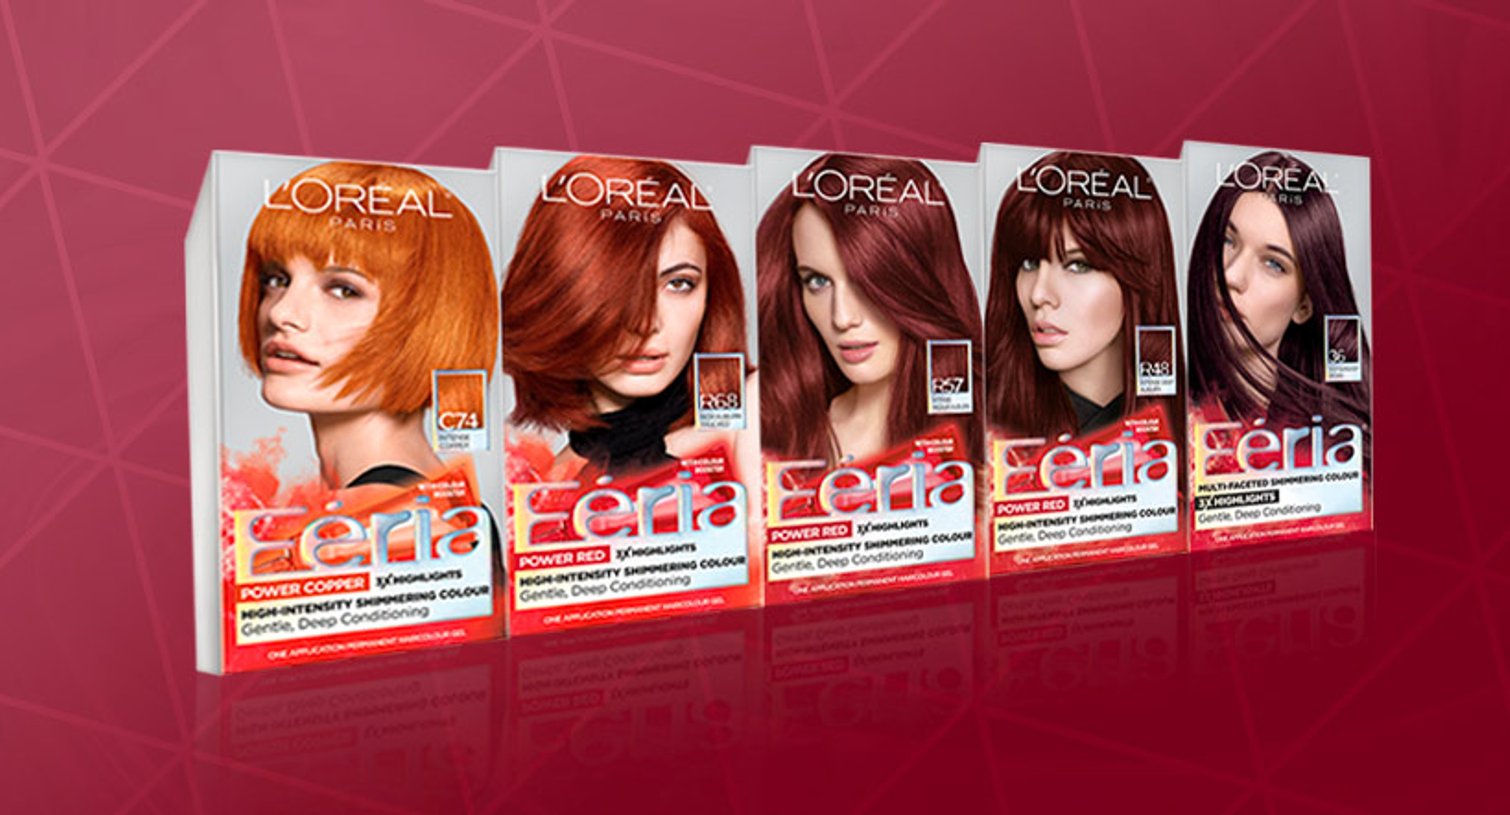 Loreal Paris BMAG Slideshow How To Get A Bold Red Hair Color SLIDE 2